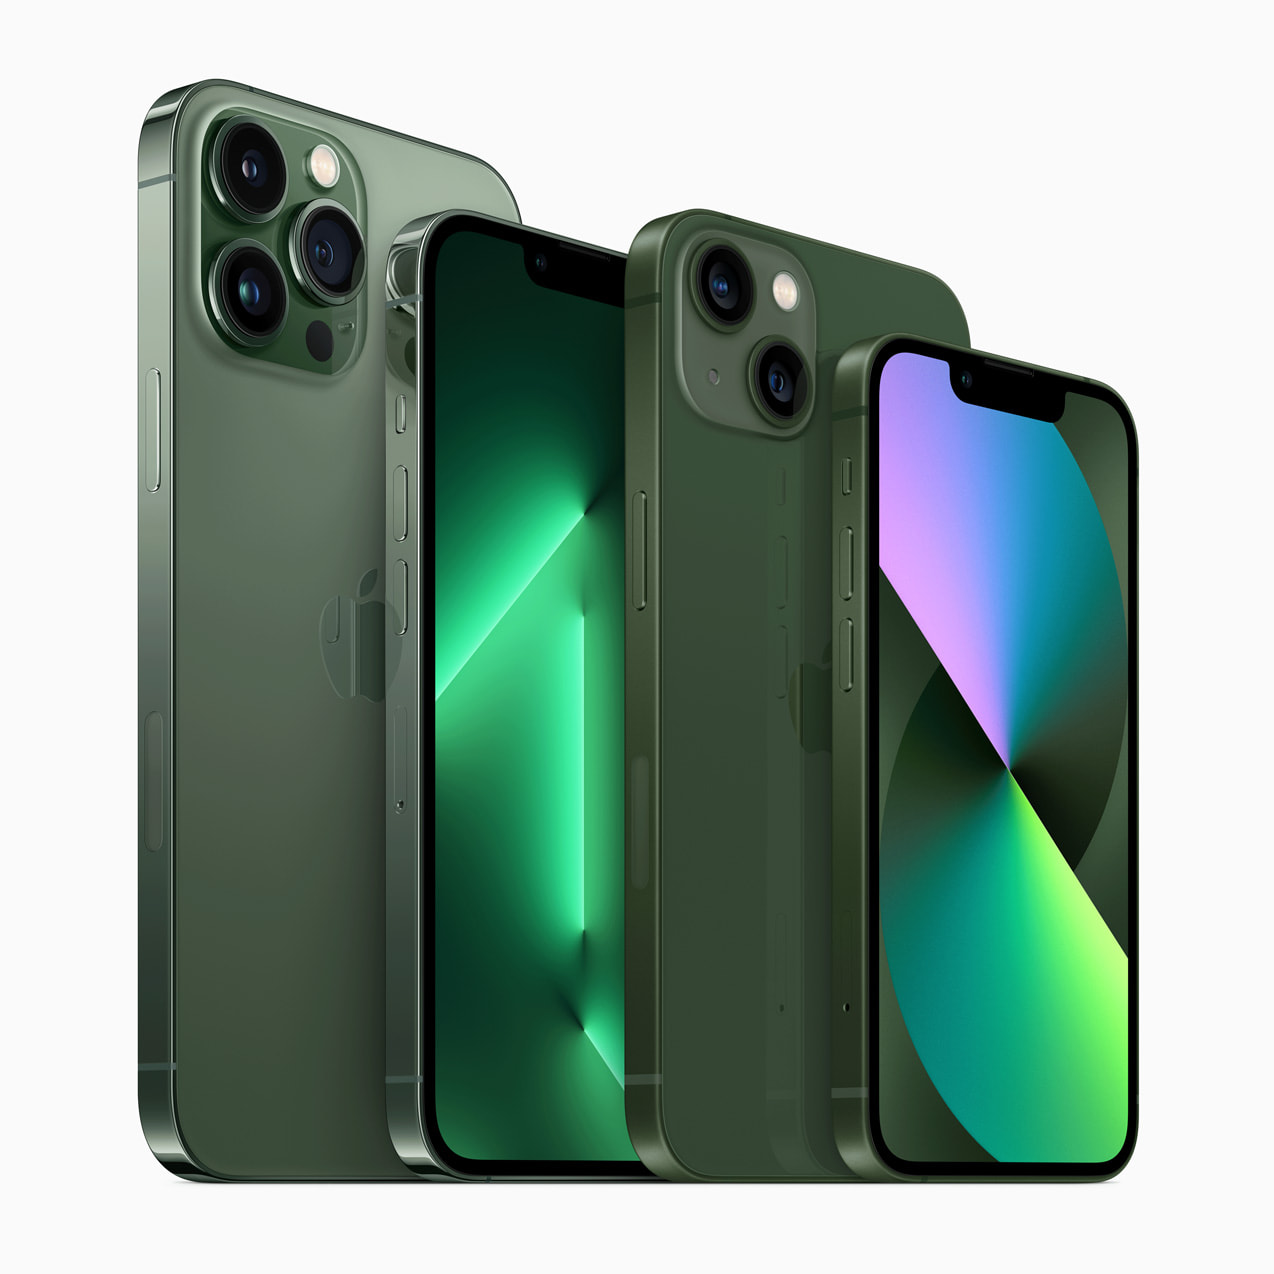 Midnight green among brand new colors for Apple's new iPhone 11 series